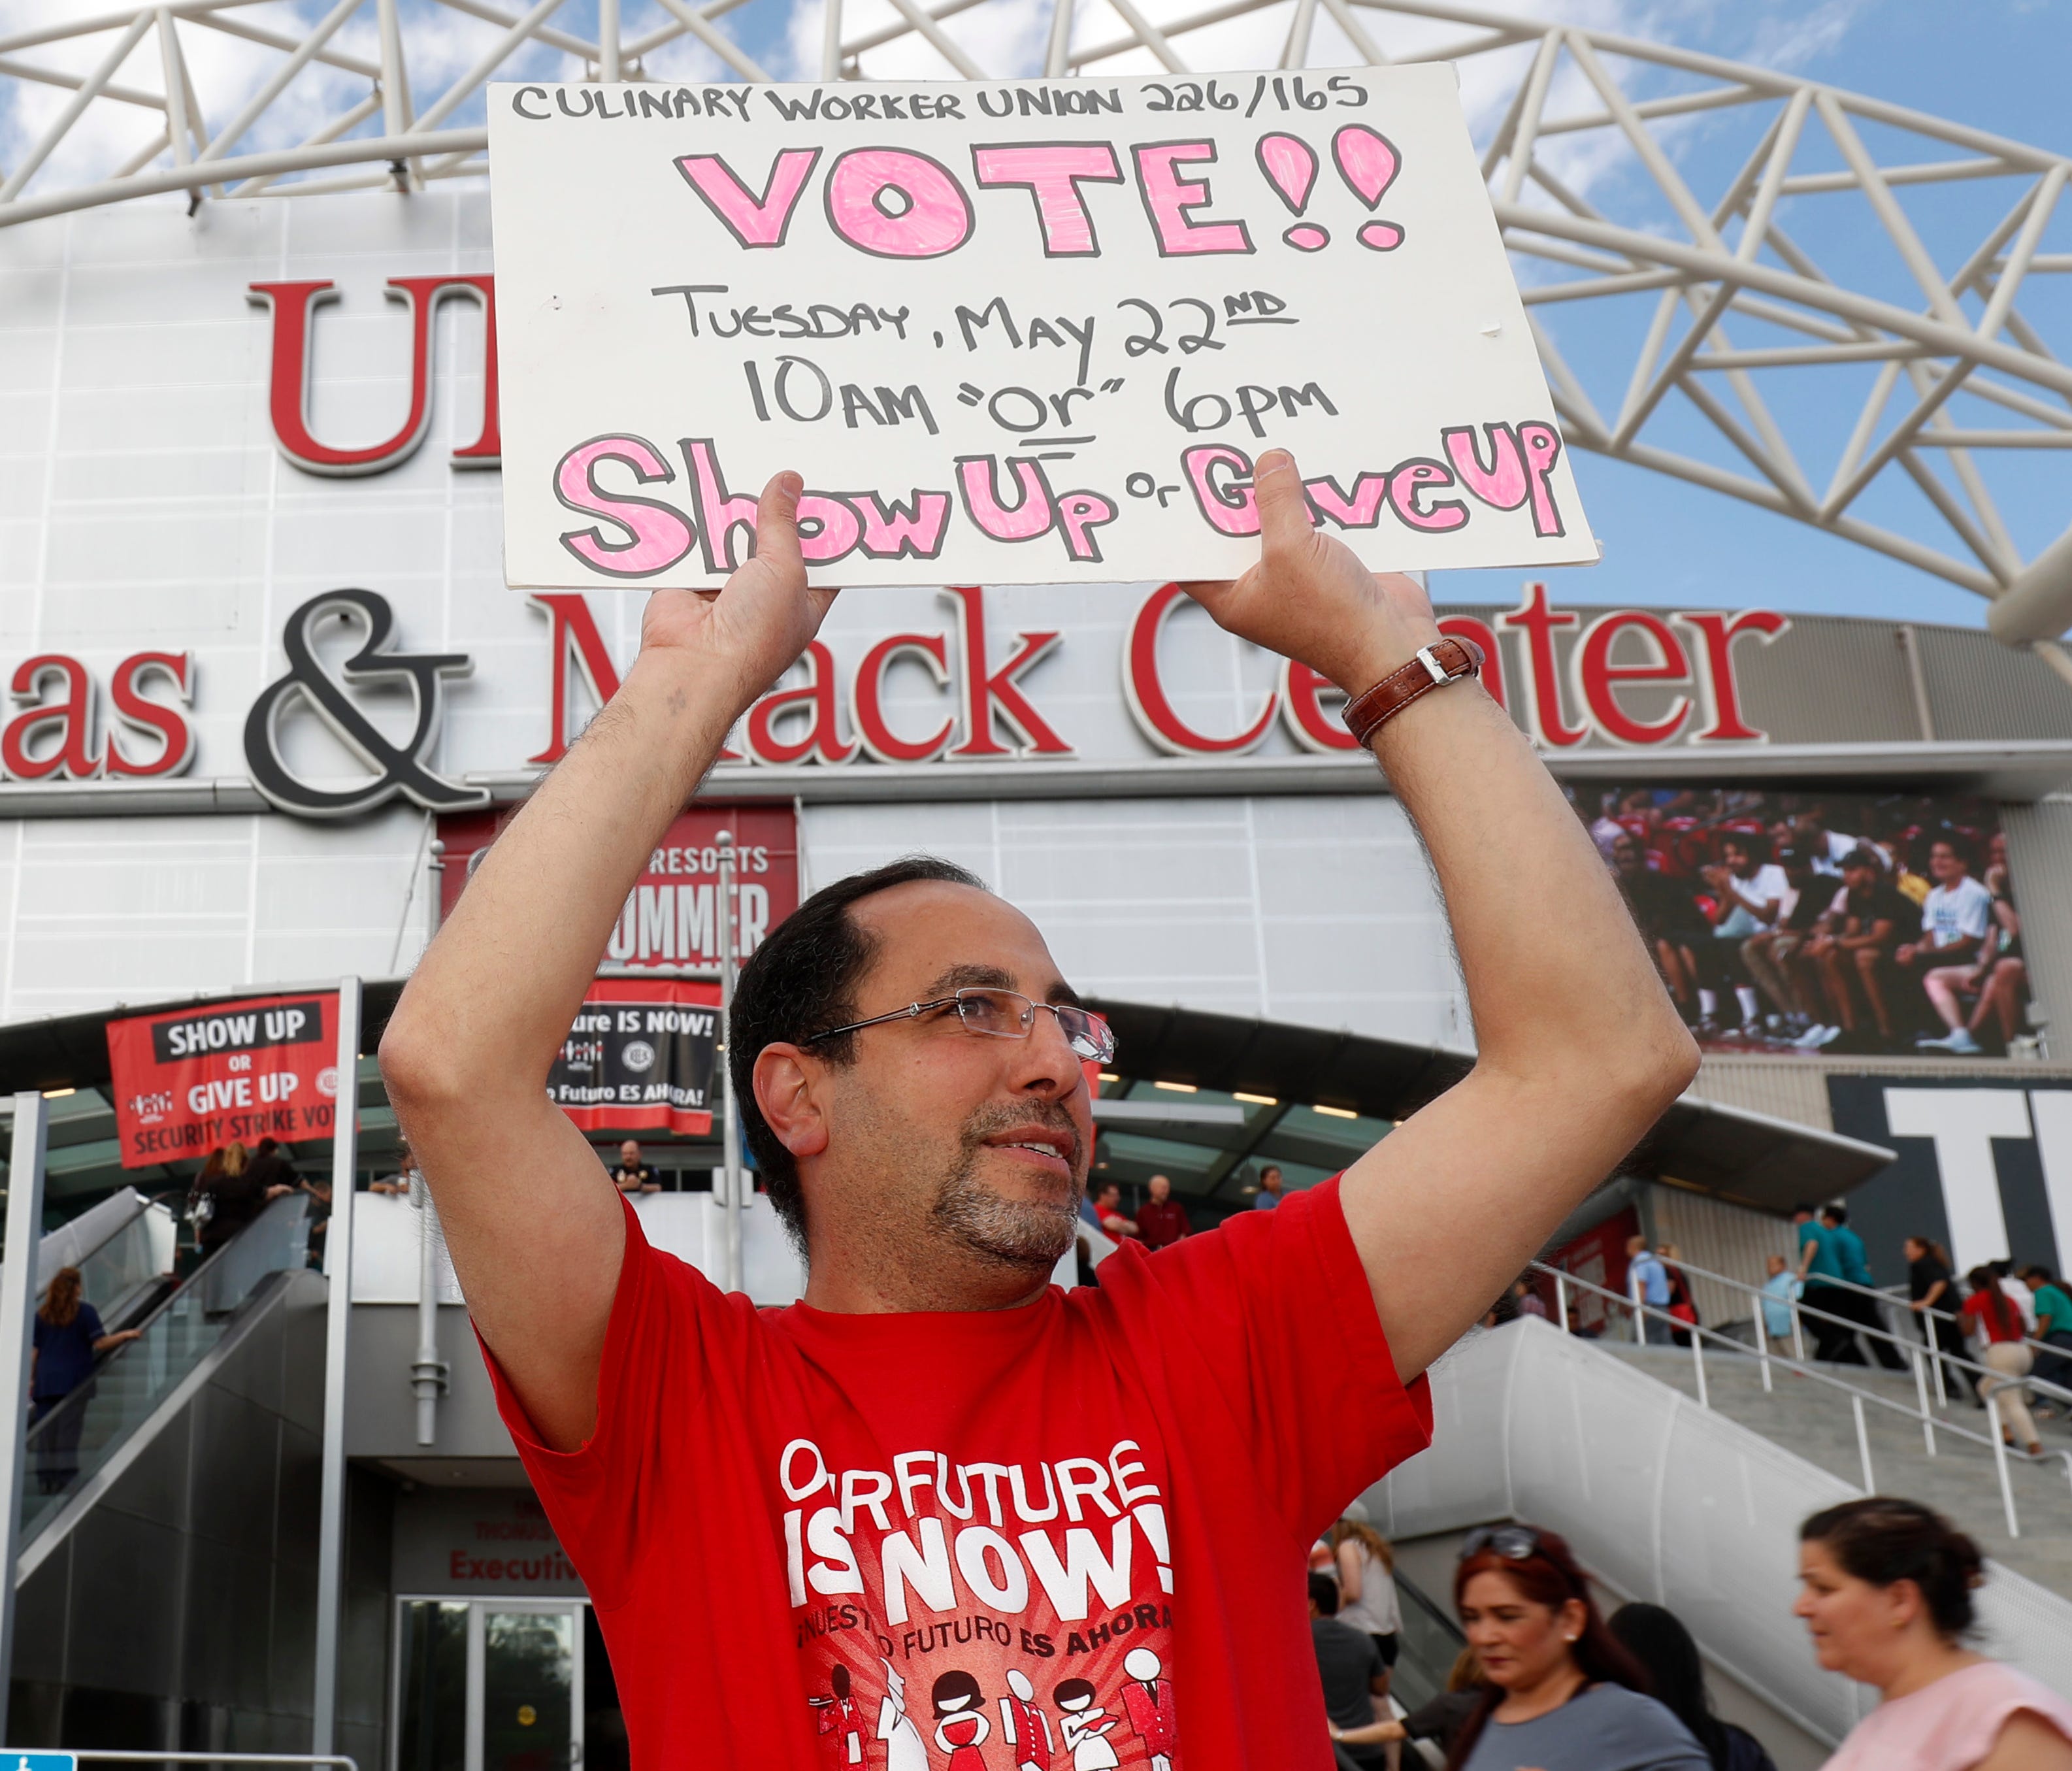 Union organizers hold signs as members of the Culinary Workers Union, Local 226, file into a university arena in Las Vegas where they voted to authorize a strike in the city's casinos. The vote will not immediately affect the casinos, but it would gi